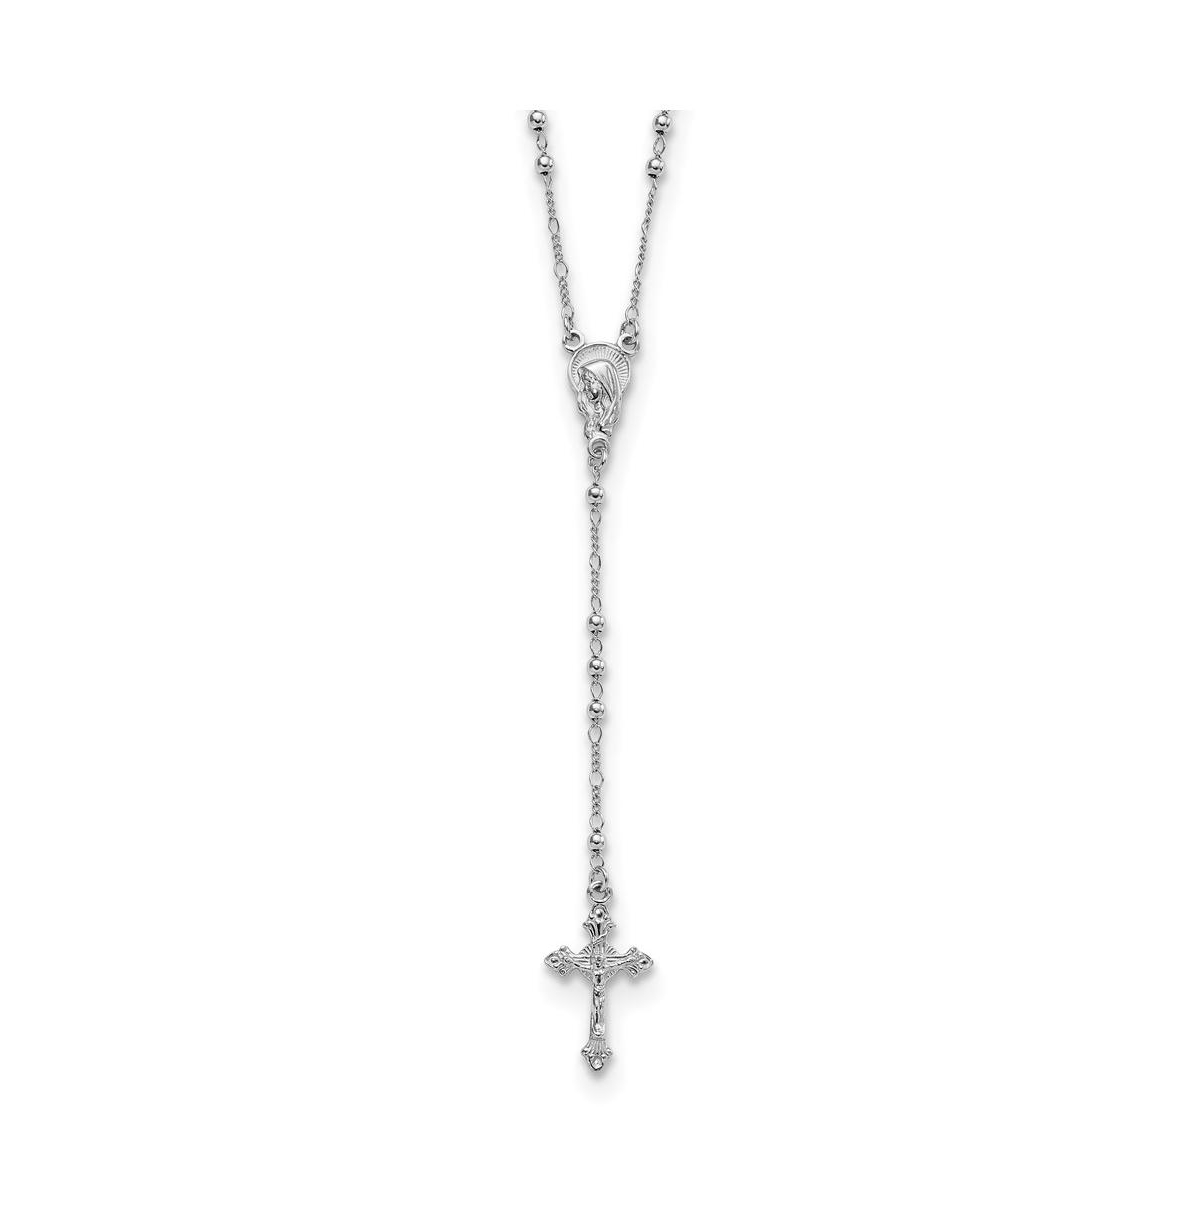 Sterling Silver Polished Beaded Rosary Pendant Necklace 24" - Silver